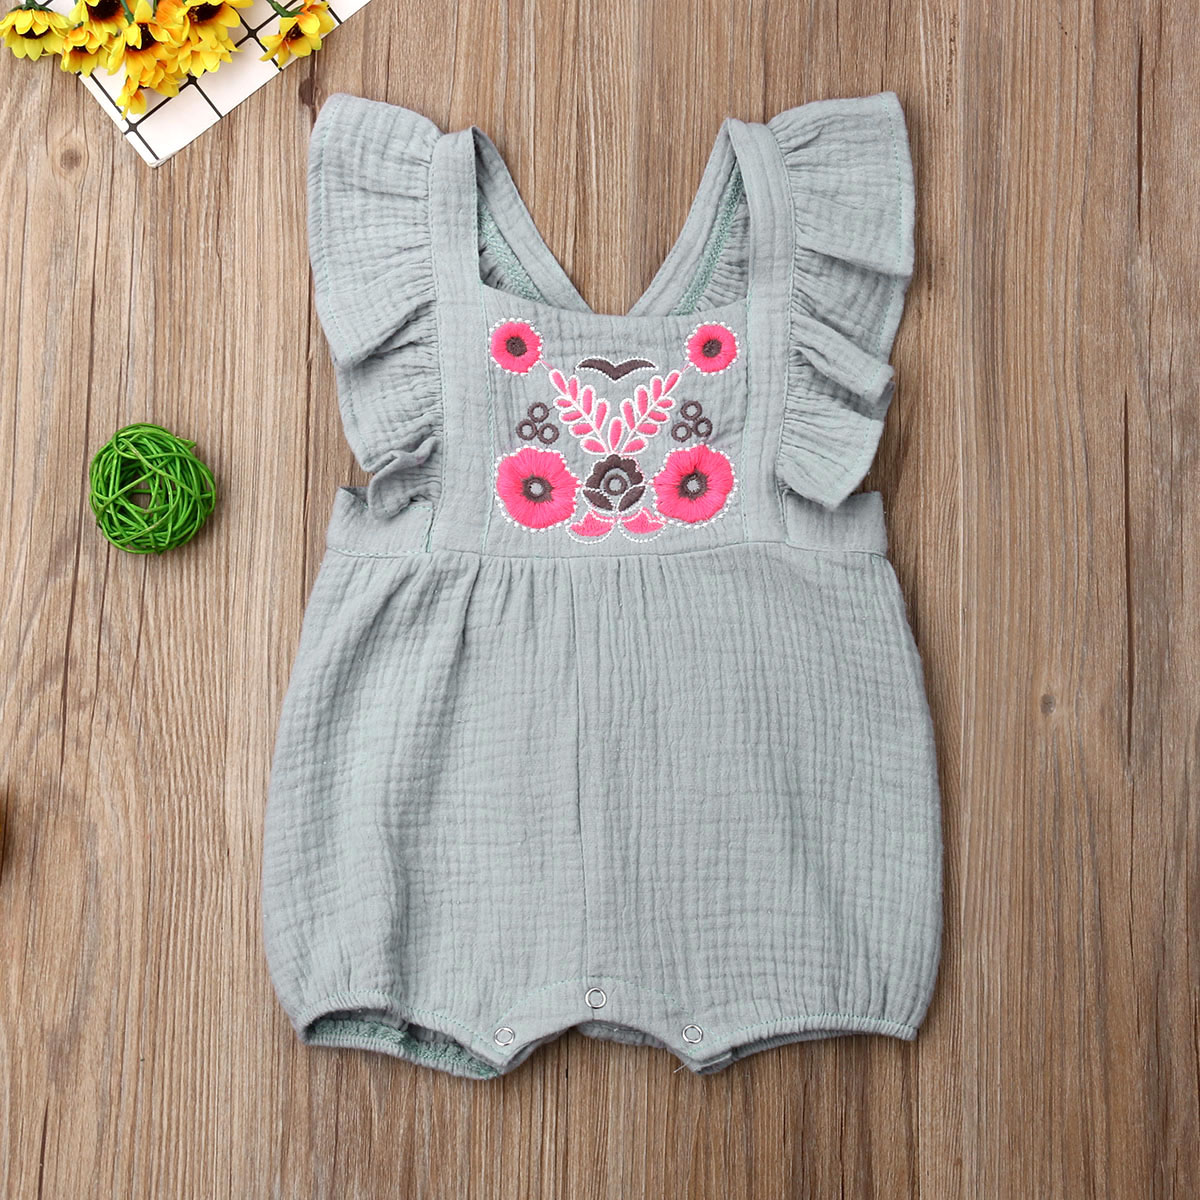 Pudcoco Newborn Baby Girl Romper Flower Embroidery Fly Sleeve Romper Jumpsuit Outfit Sunsuit